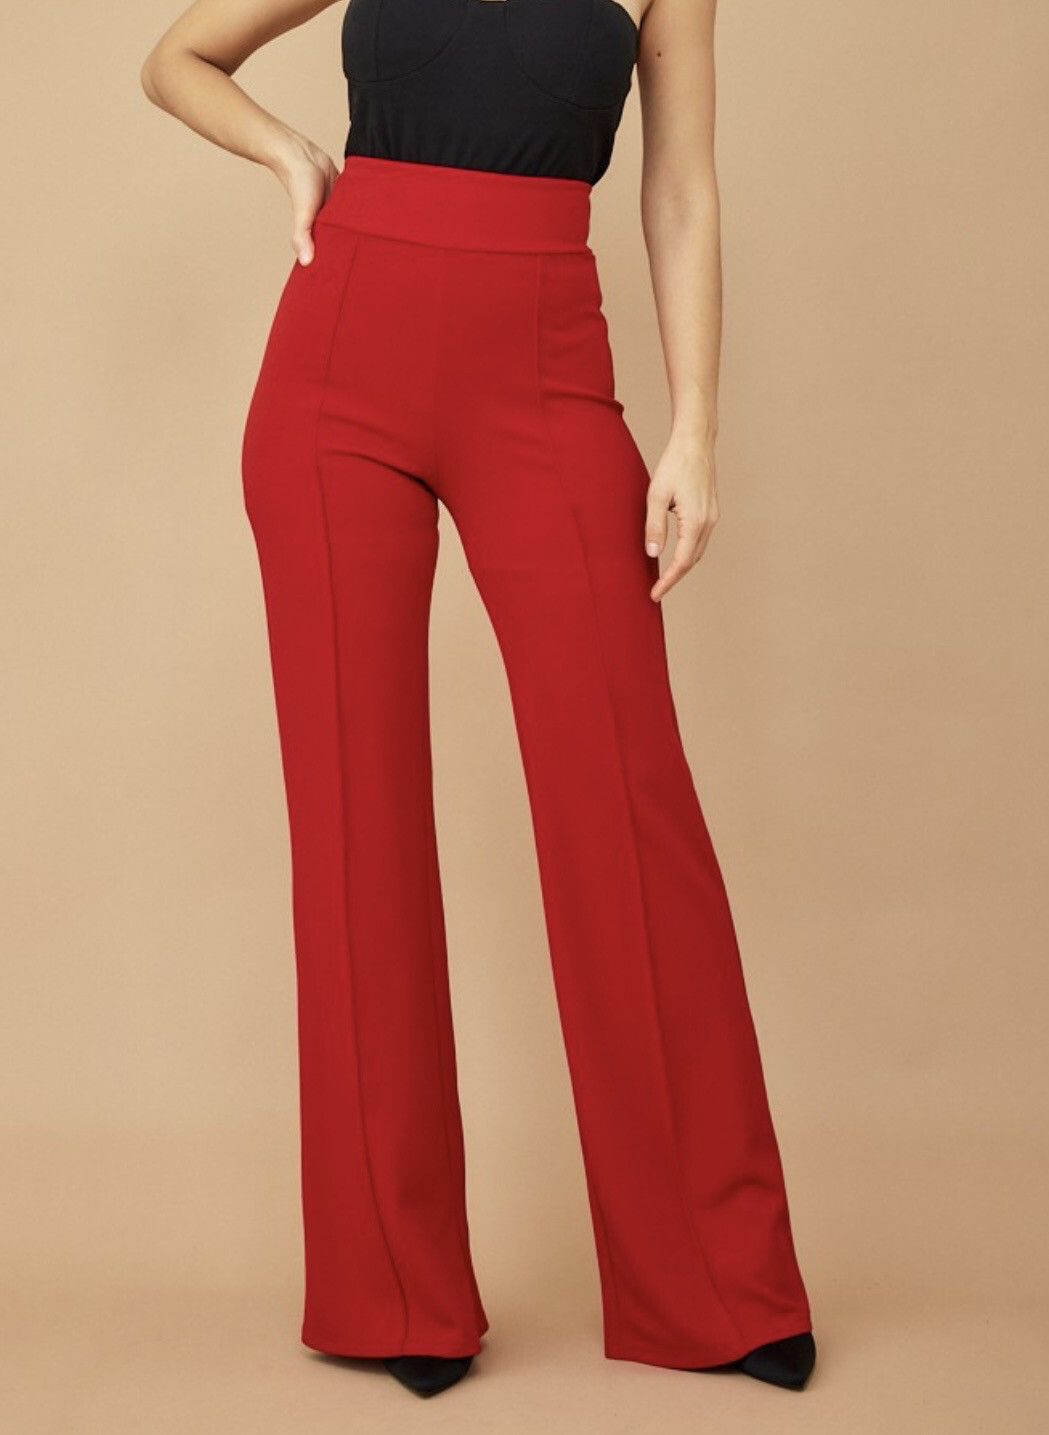 Red Highwaisted Pants